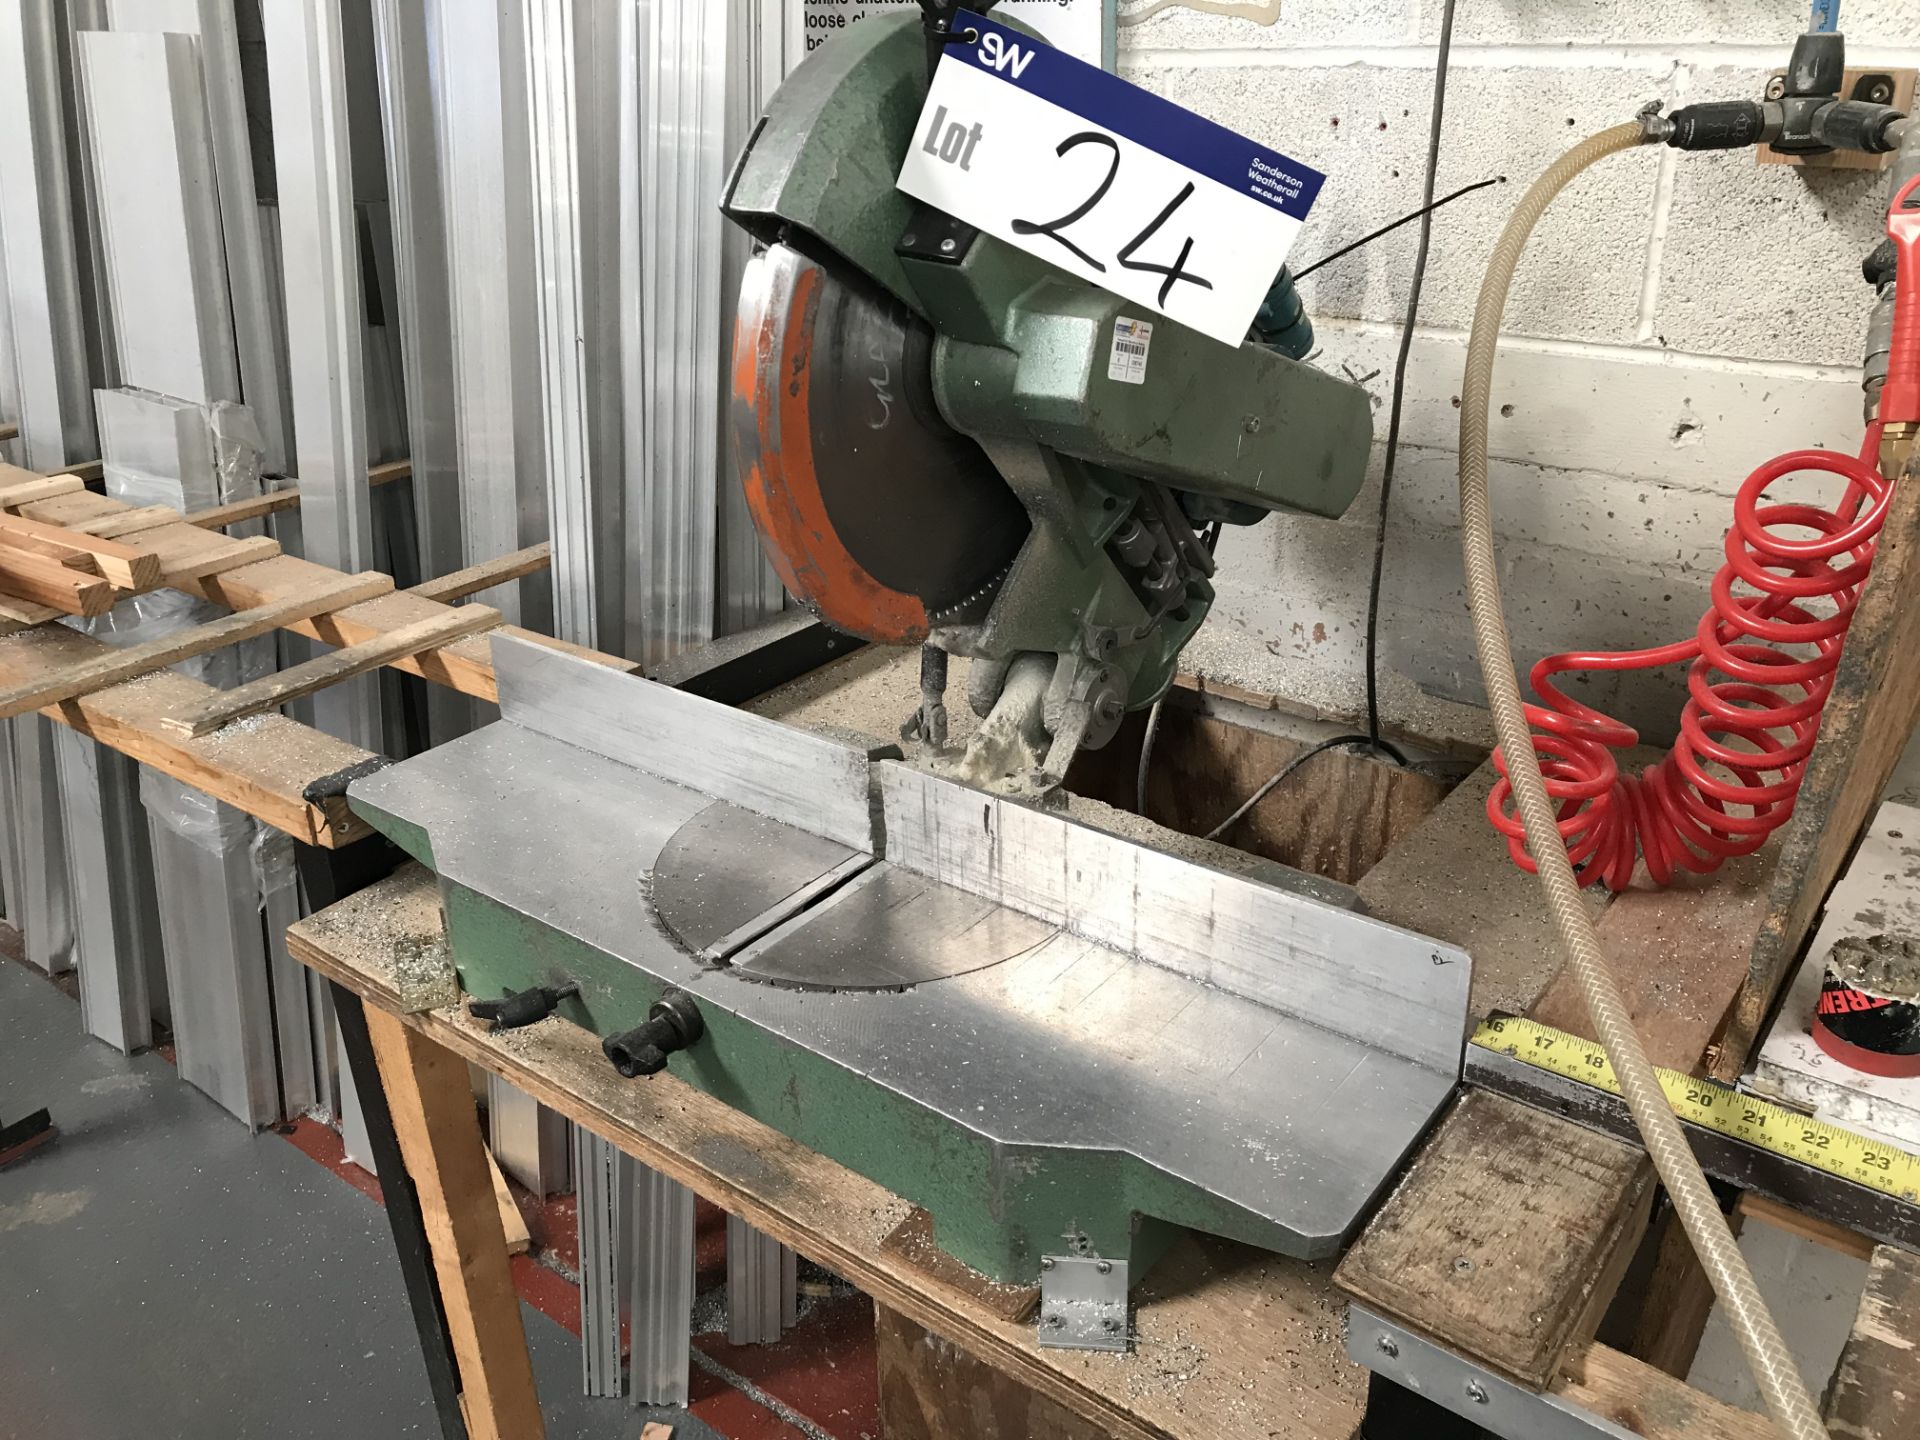 Unbranded Mitre Cutting Saw, 240V with wooden & metal framed benchesPlease read the following